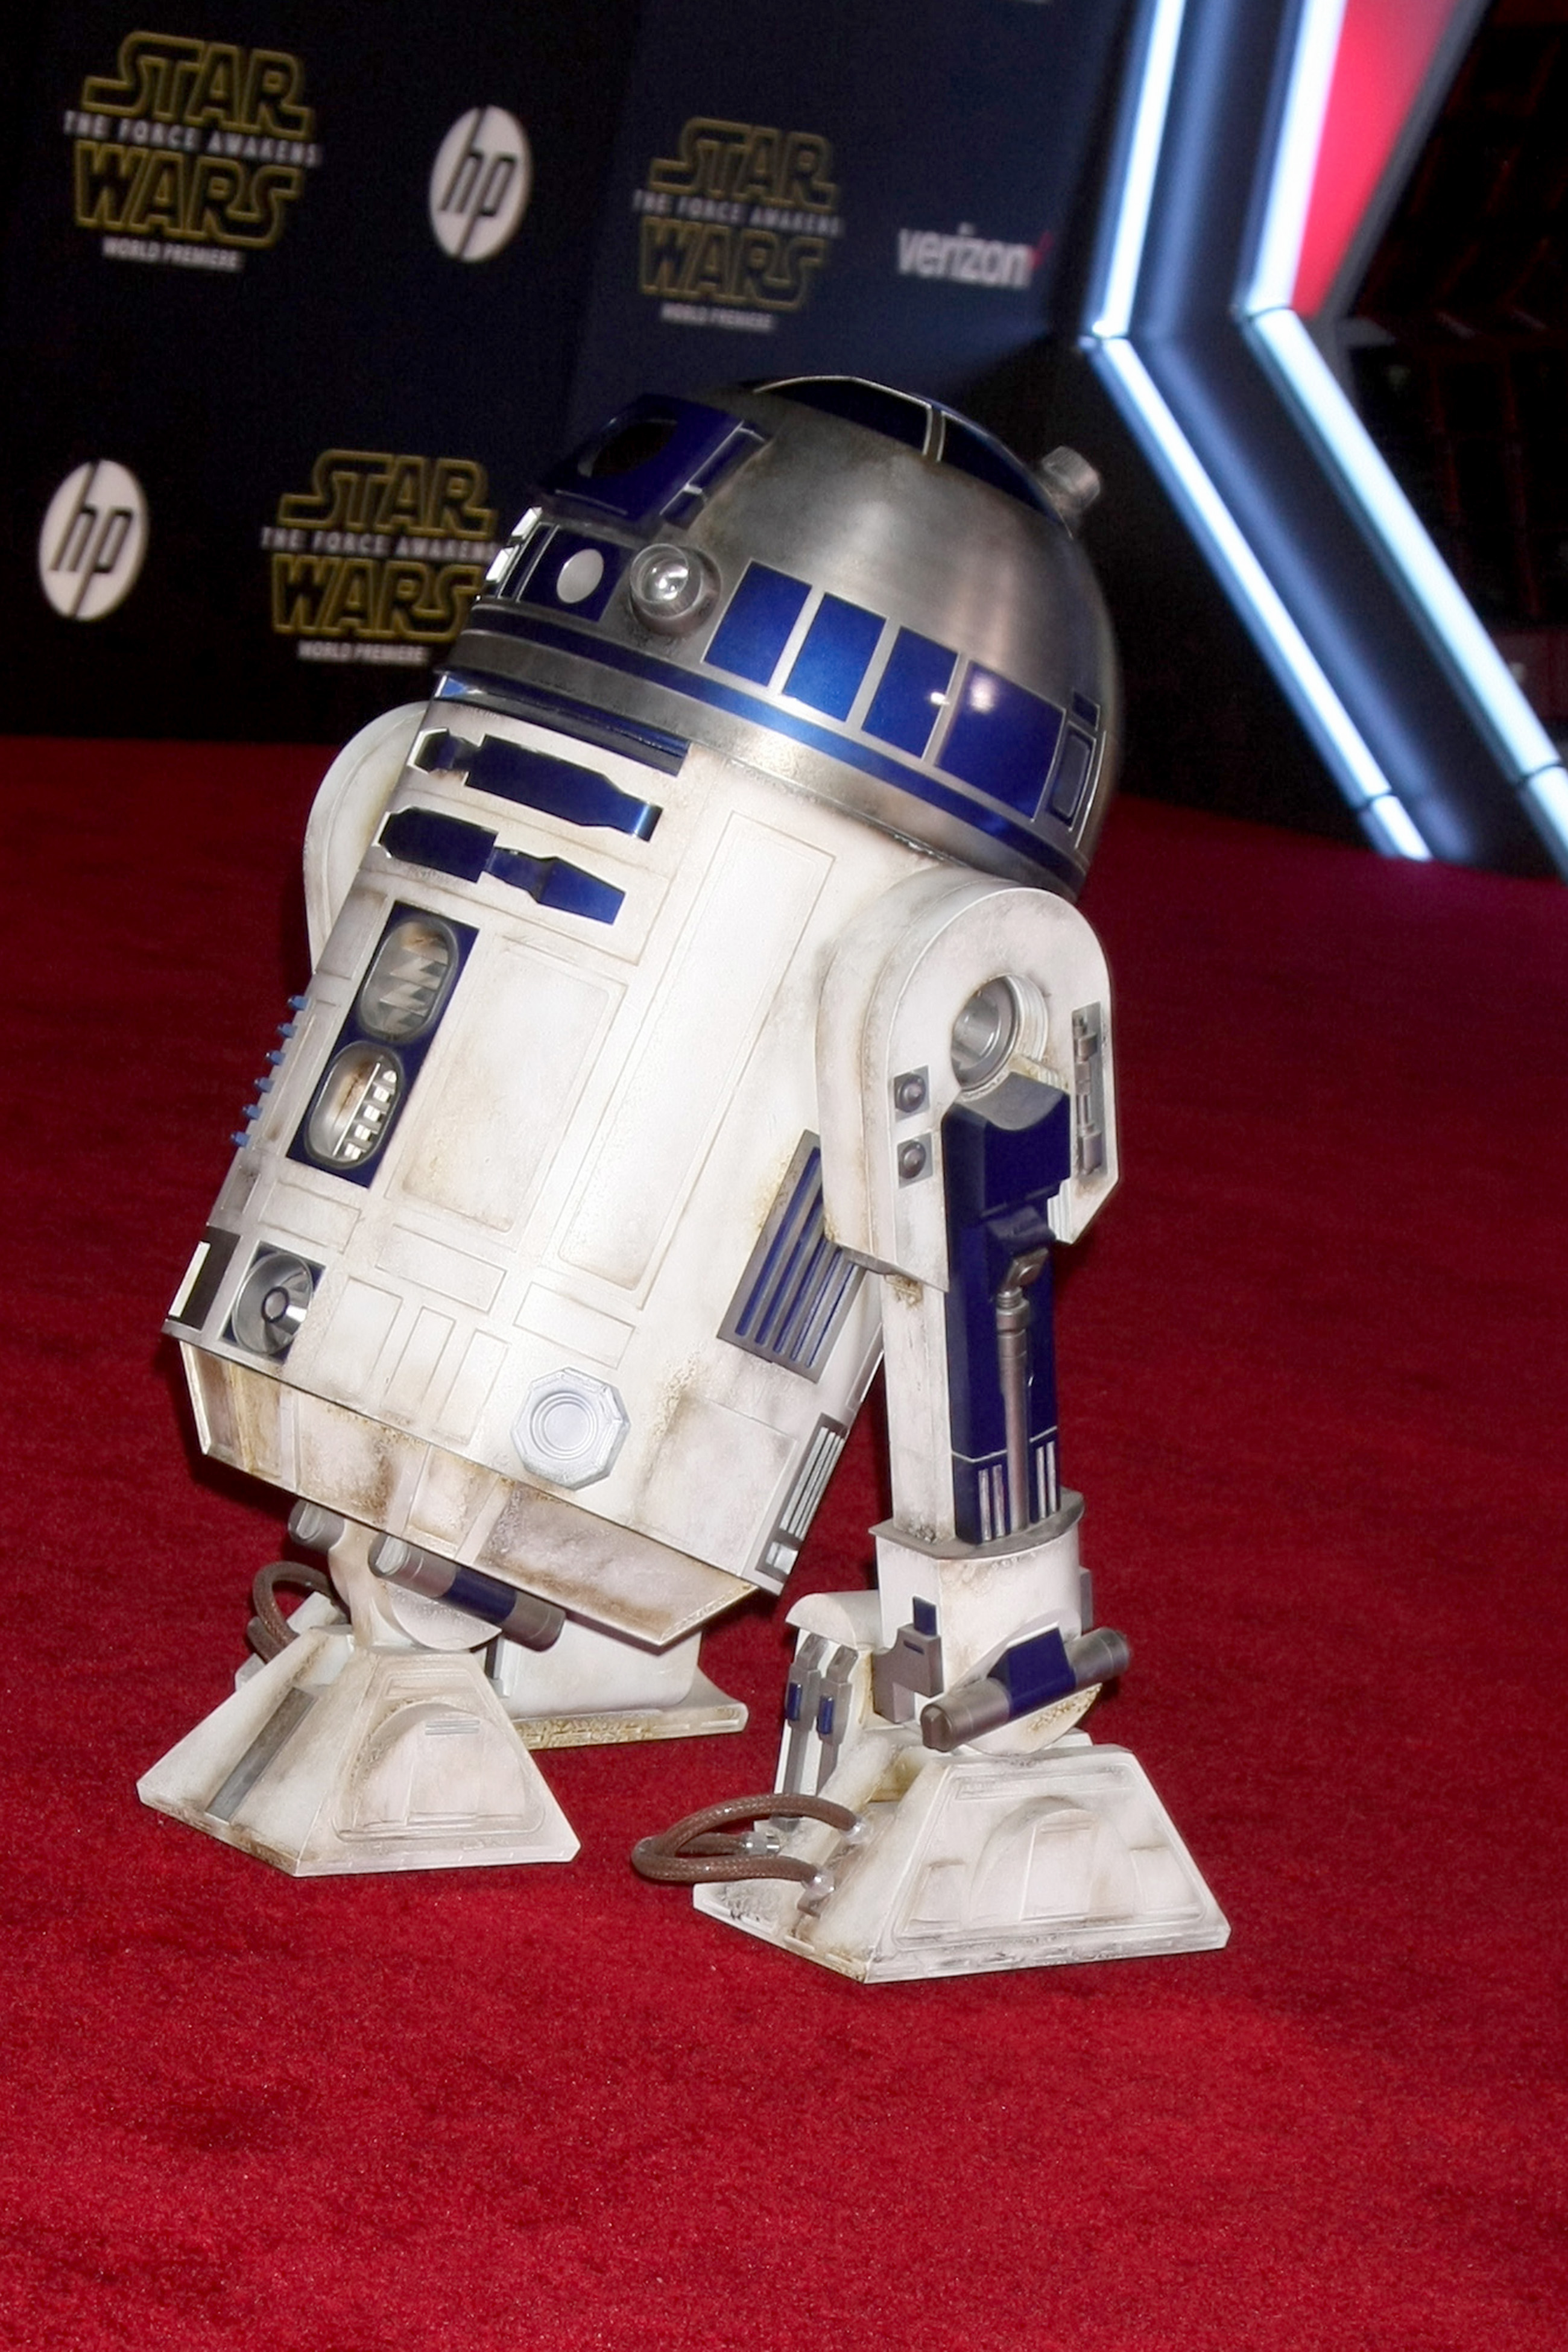 Discover Amazing Hidden Gems at Star Wars with Your Family at Hollywood Studios - R2D2